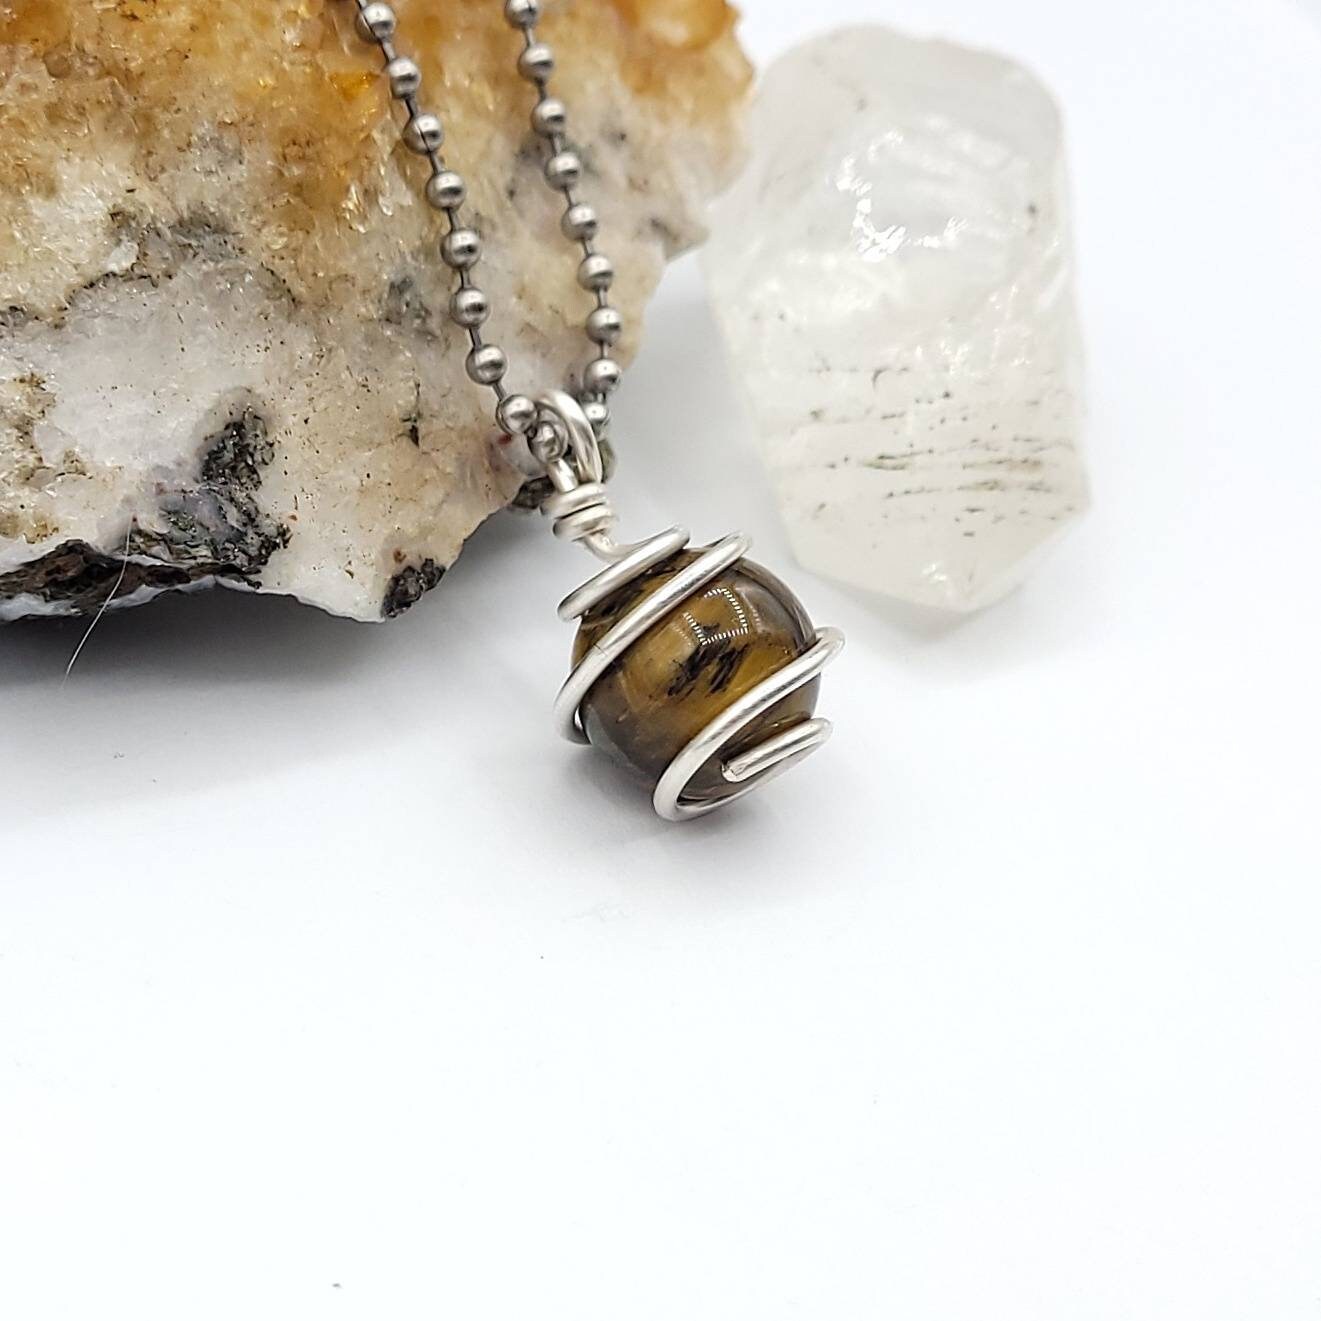 Tiger's Eye Sphere Necklace, Silver Wire Wrapped Tiger's Eye Pendant, Raw Tiger's Eye Jewelry